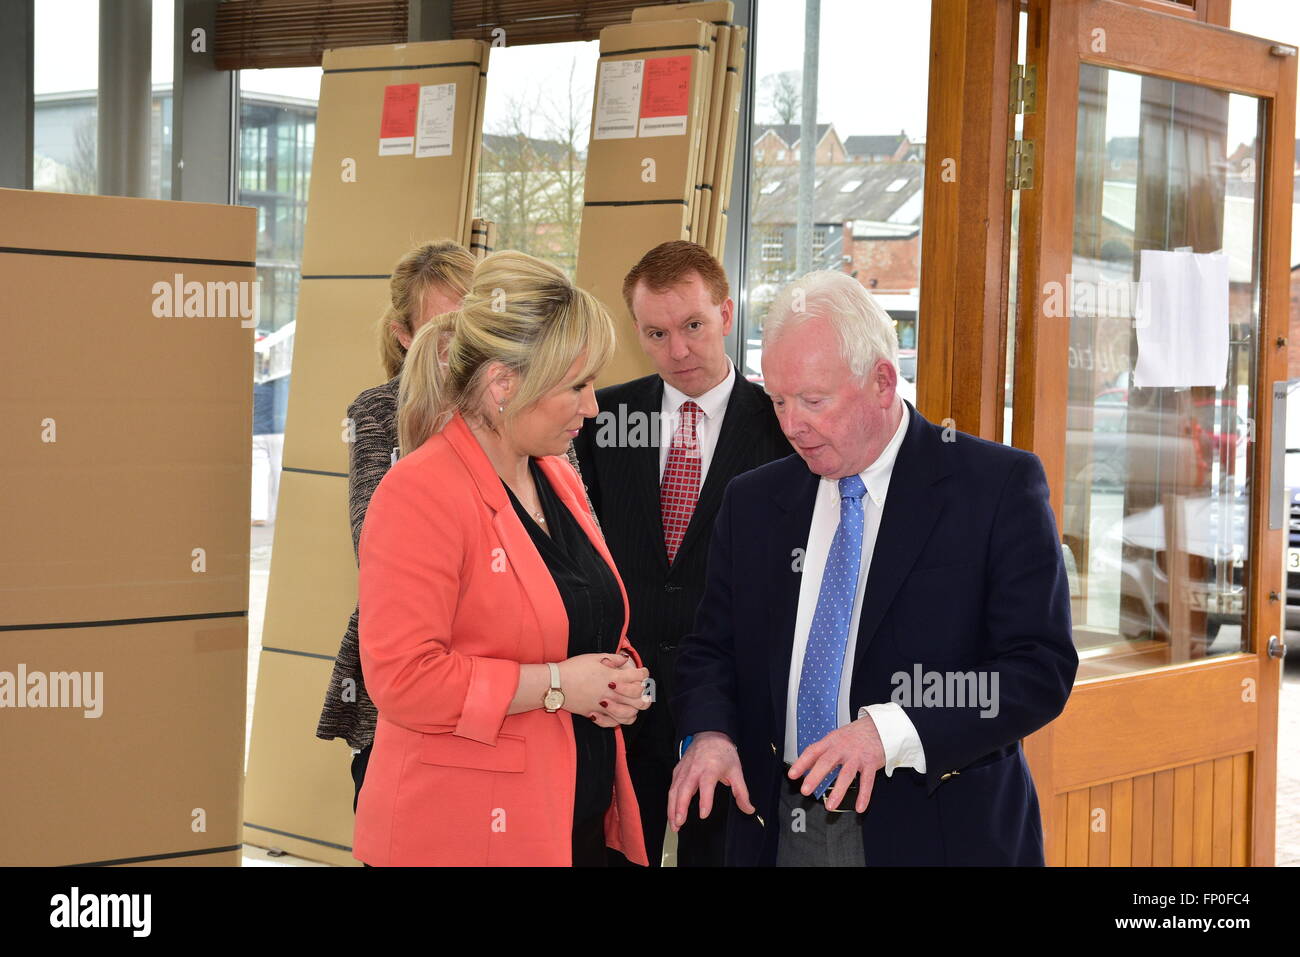 Dungannon, United Kingdom. 16th Mar, 2016. Michelle O'Neill, Minister of Agriculture and Rural Development visited the Linen Green Retail complex in Moygashel, Dungannon and spoke with Sean T Hughes, Director of Sales at The Design Yard. © Mark Winter/Pacific Press/Alamy Live News Stock Photo